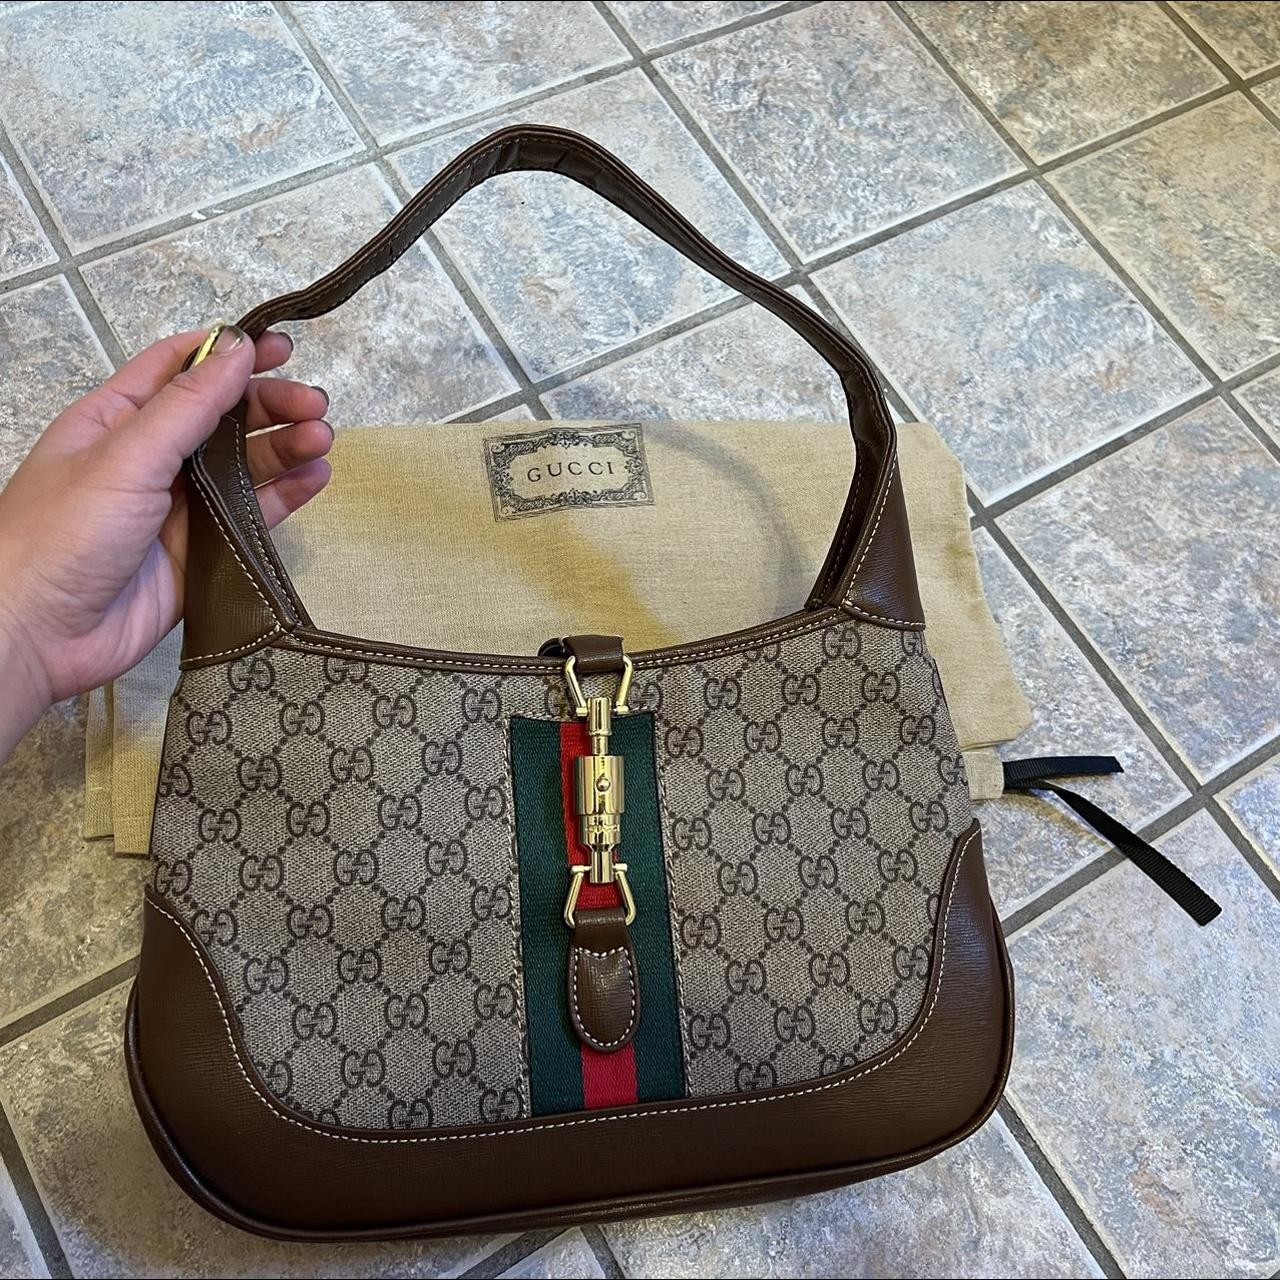 VINTAGE GUCCI FANNY PACK LIKE BAG from mom's closet - Depop